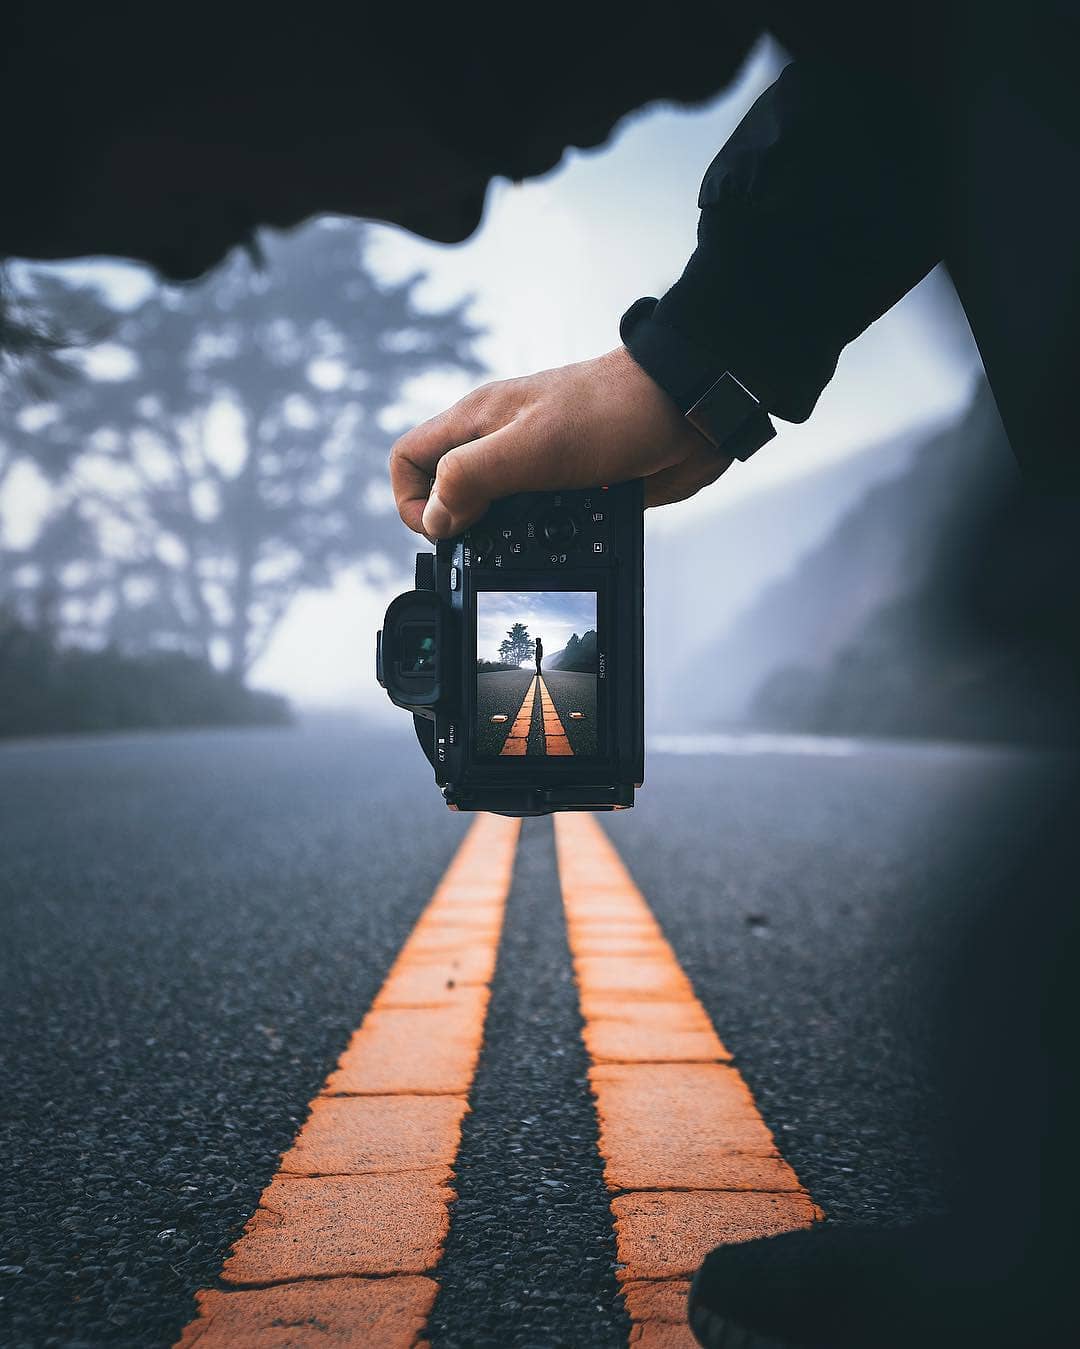 Beautiful photo of a guy taking a photo of a road